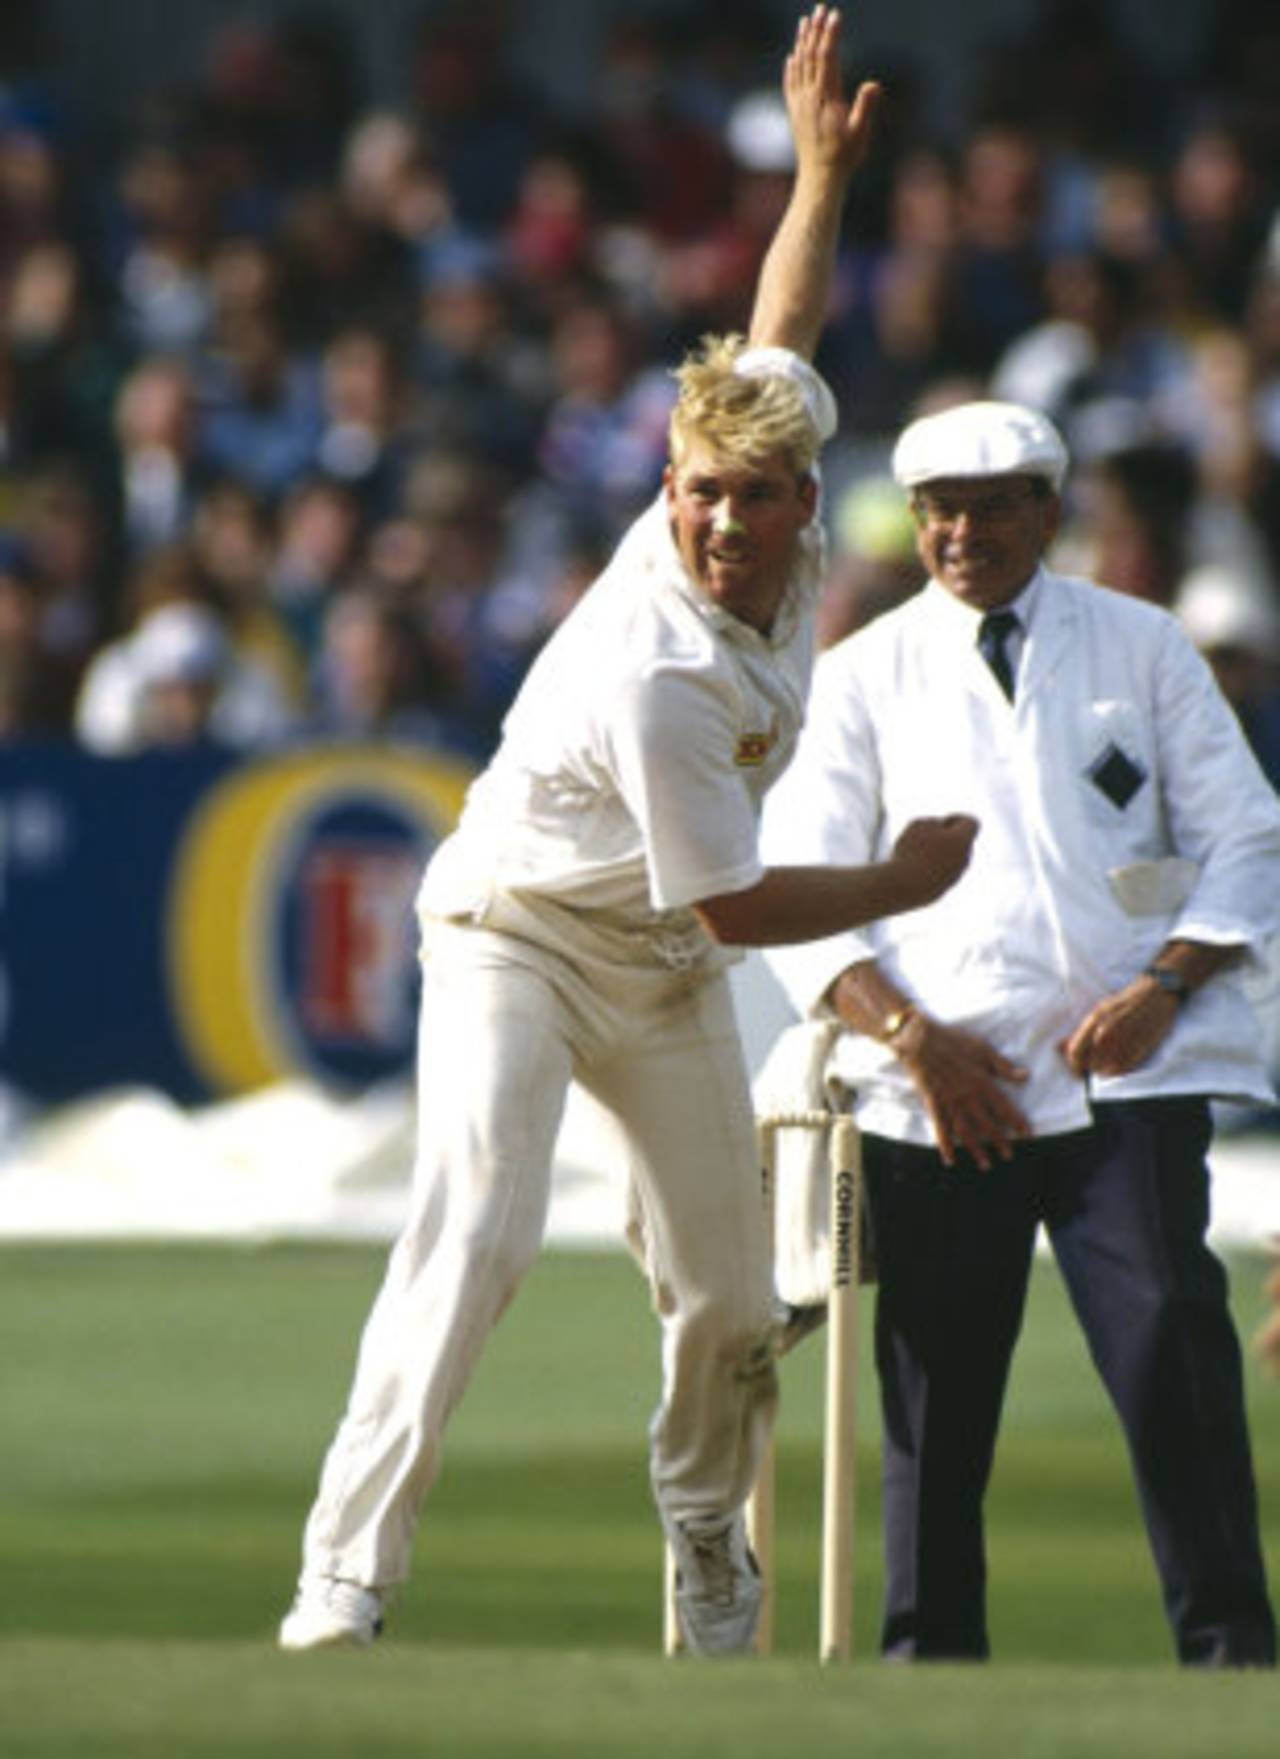 When he started out, Shane Warne didn't give any hint he would become the greatest legspinner in the game&nbsp;&nbsp;&bull;&nbsp;&nbsp;Getty Images